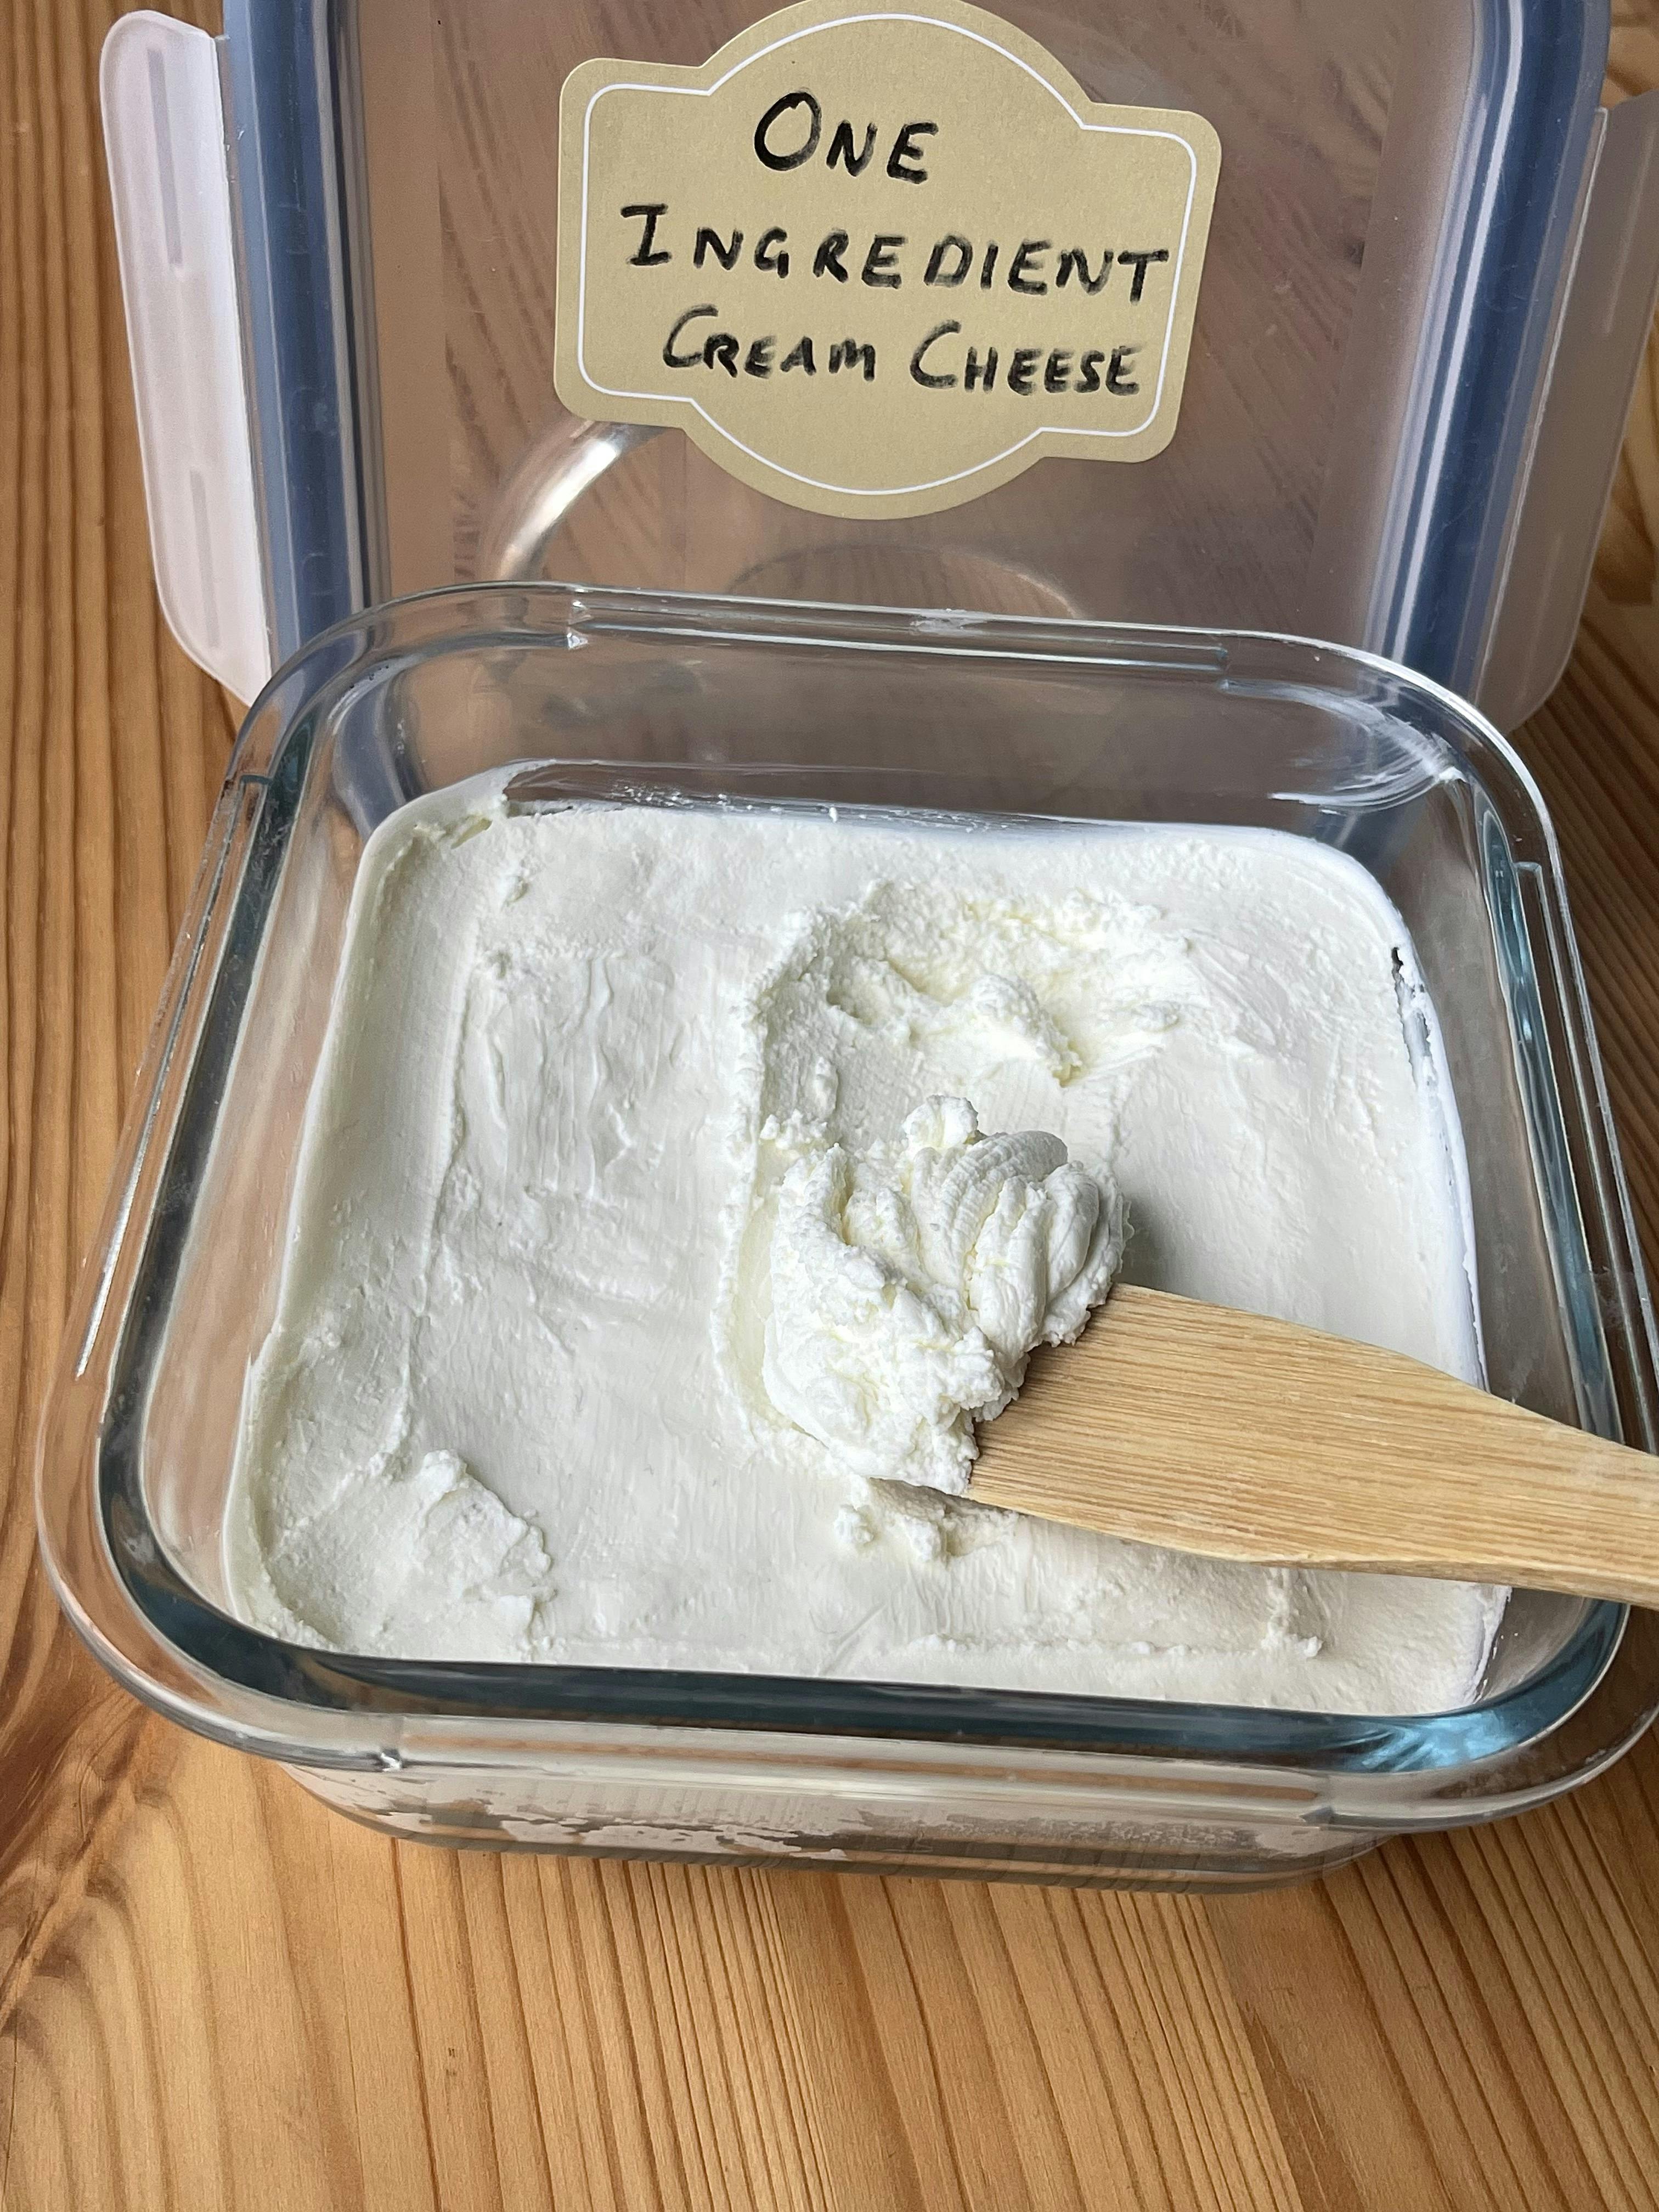 Picture for One Ingredient Cream Cheese